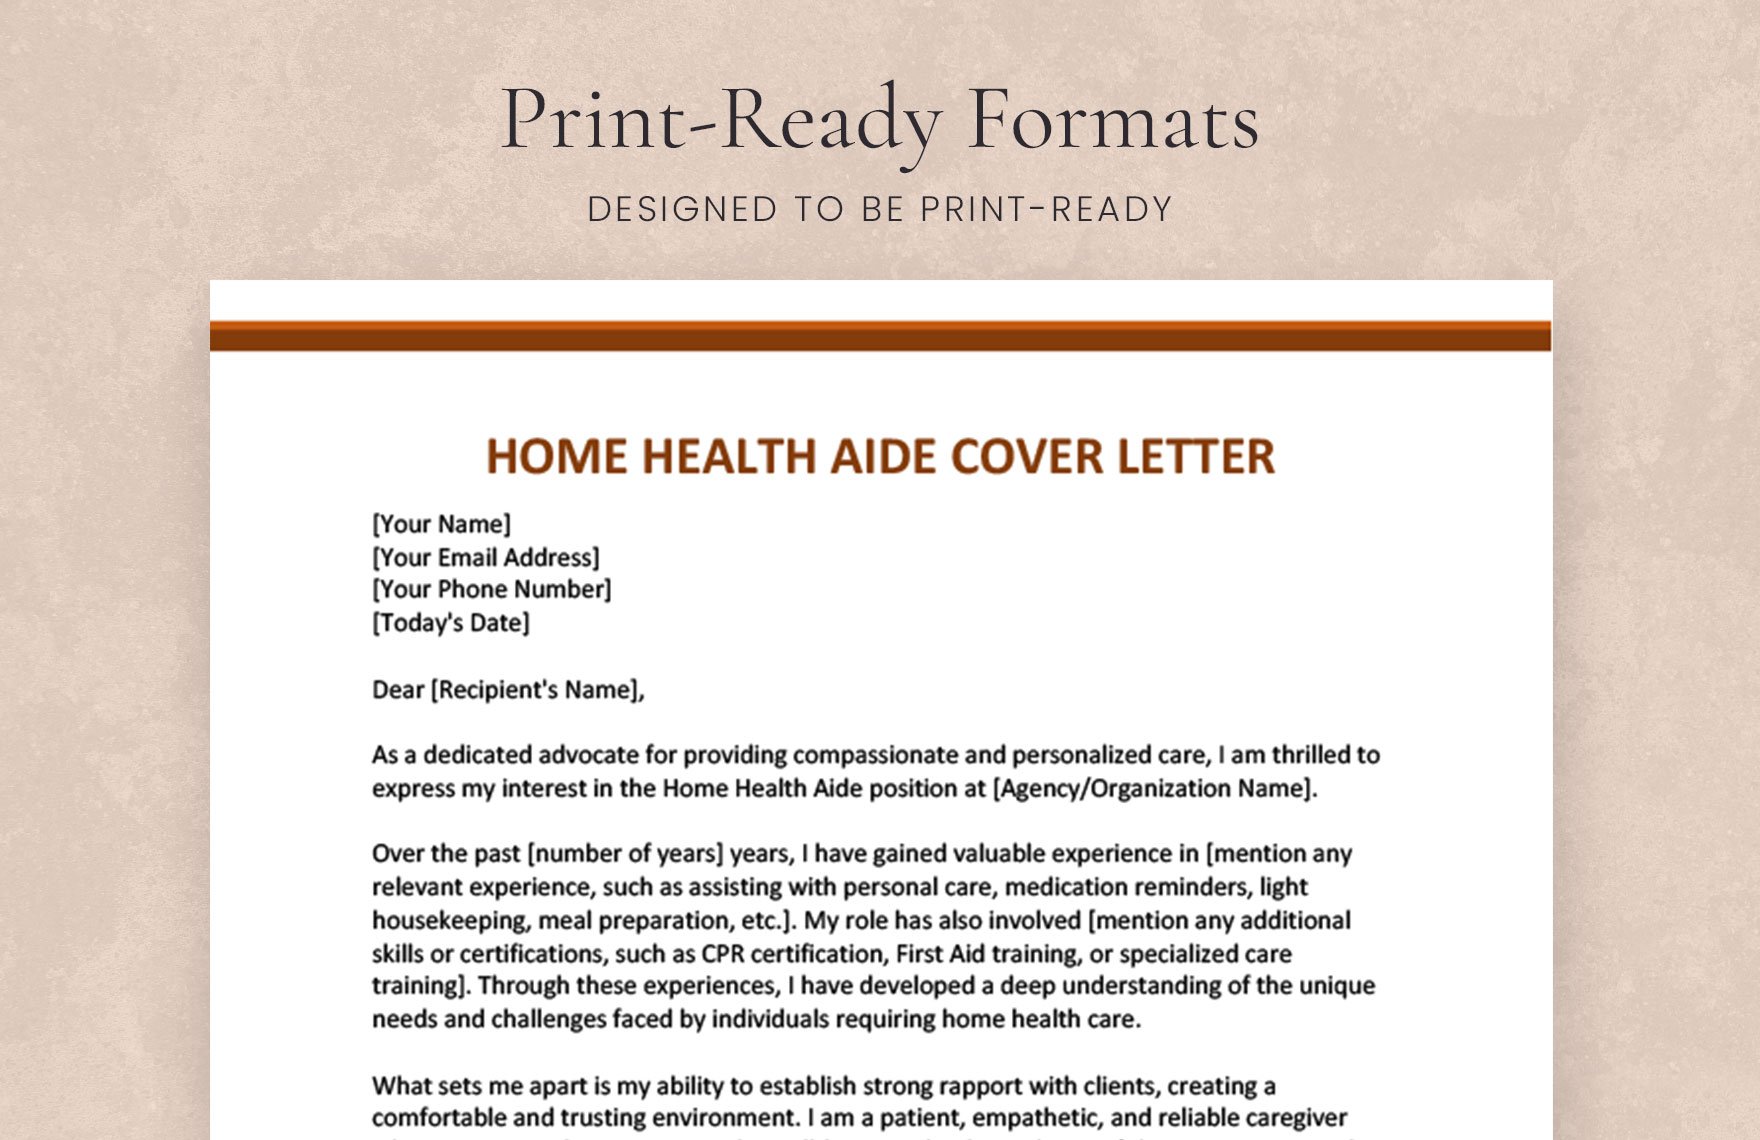 Home Health Aide Cover Letter